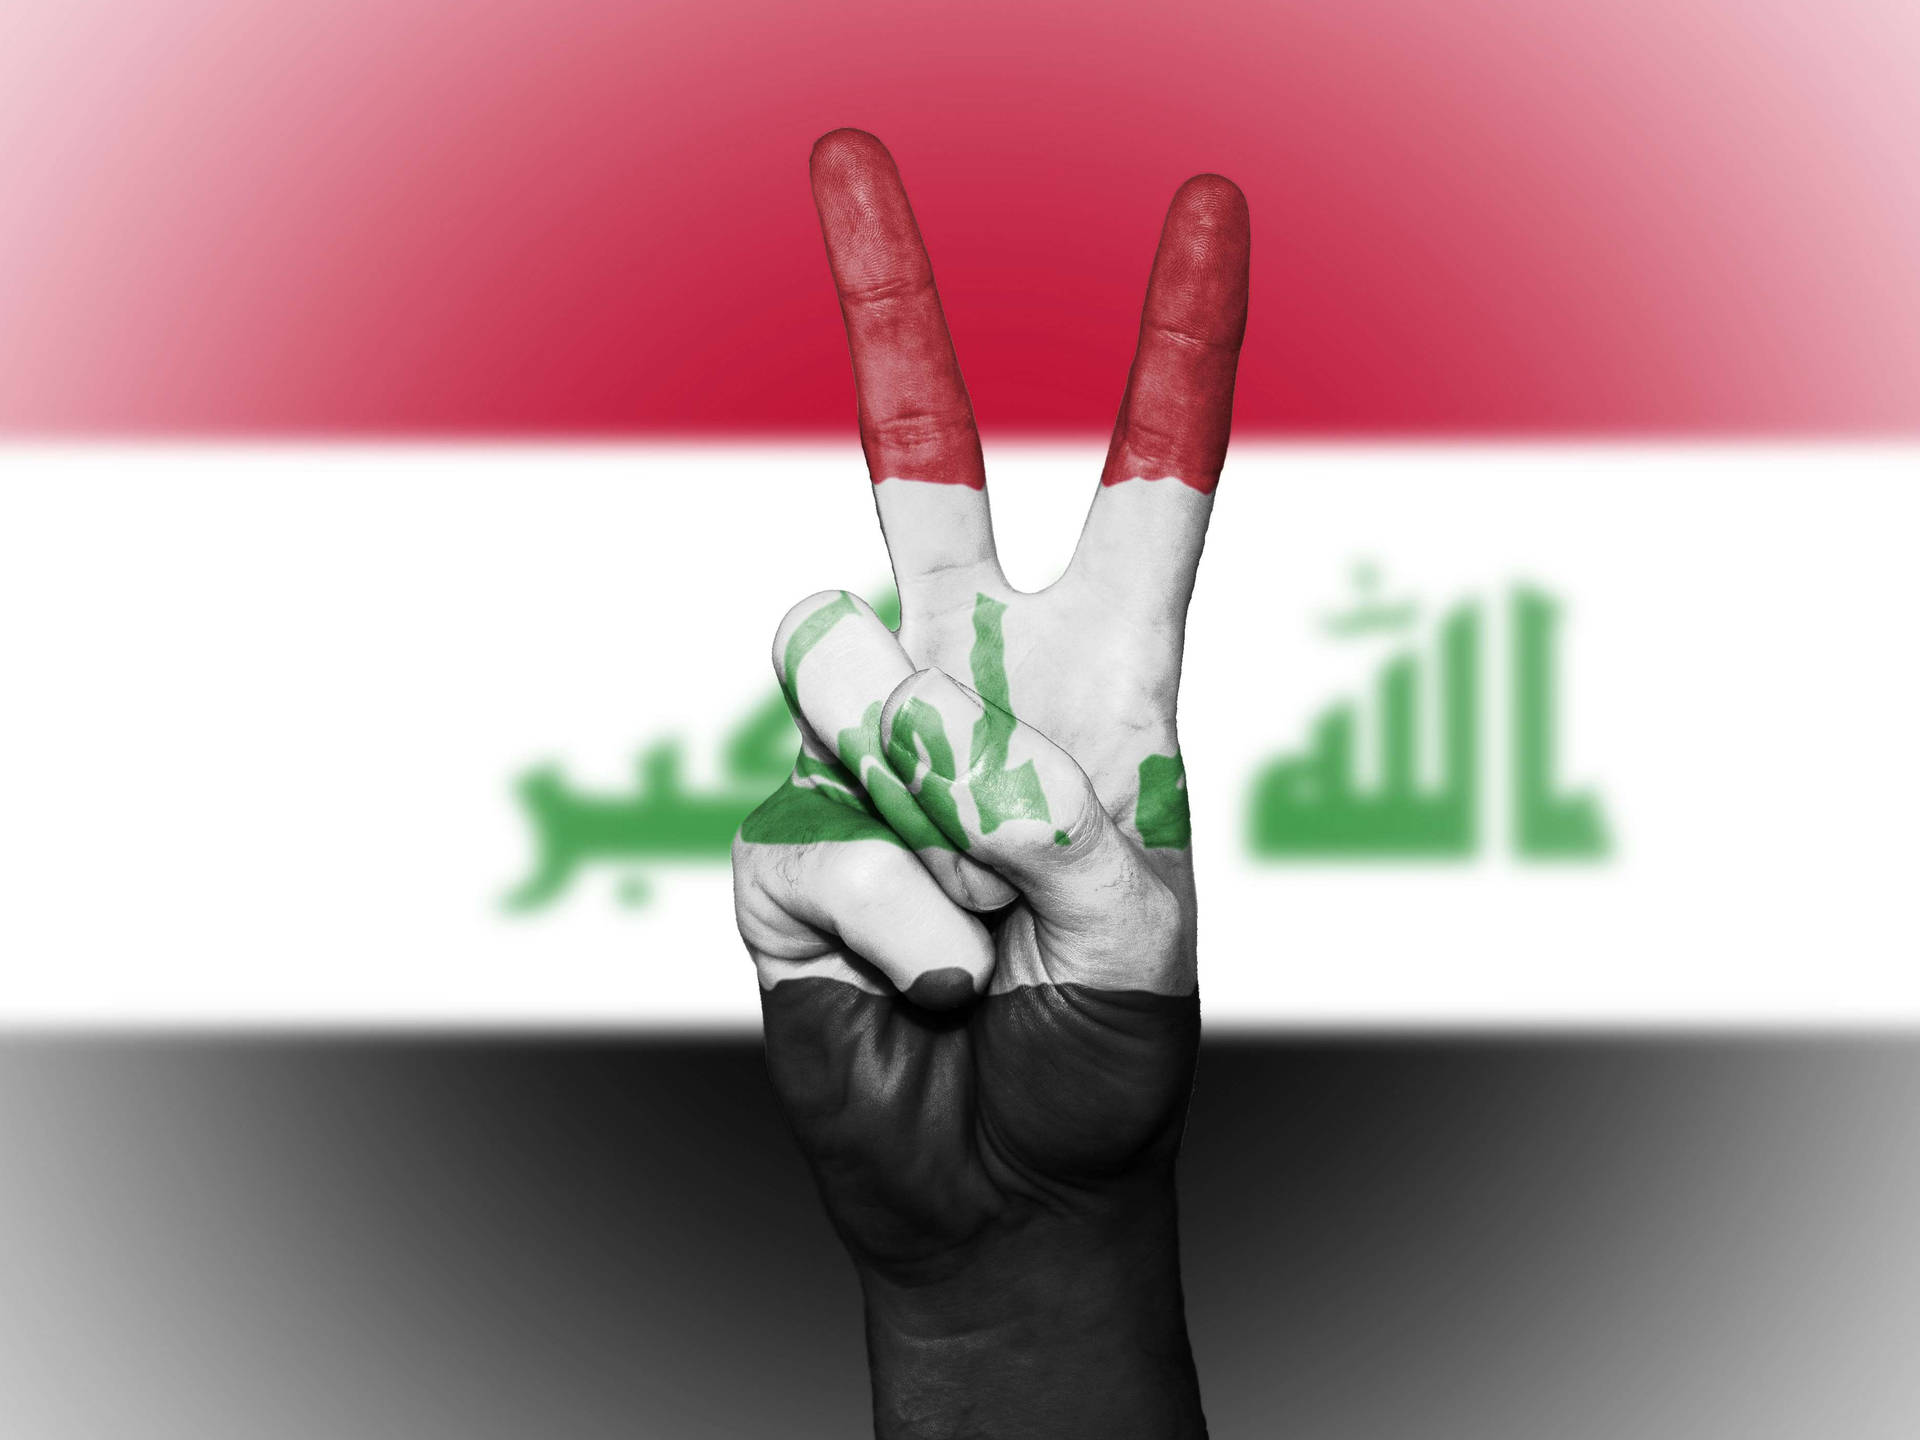 The Peaceful Power Of Iraq - A Hand Symbolizing Peace Covered With An Iraqi Flag.